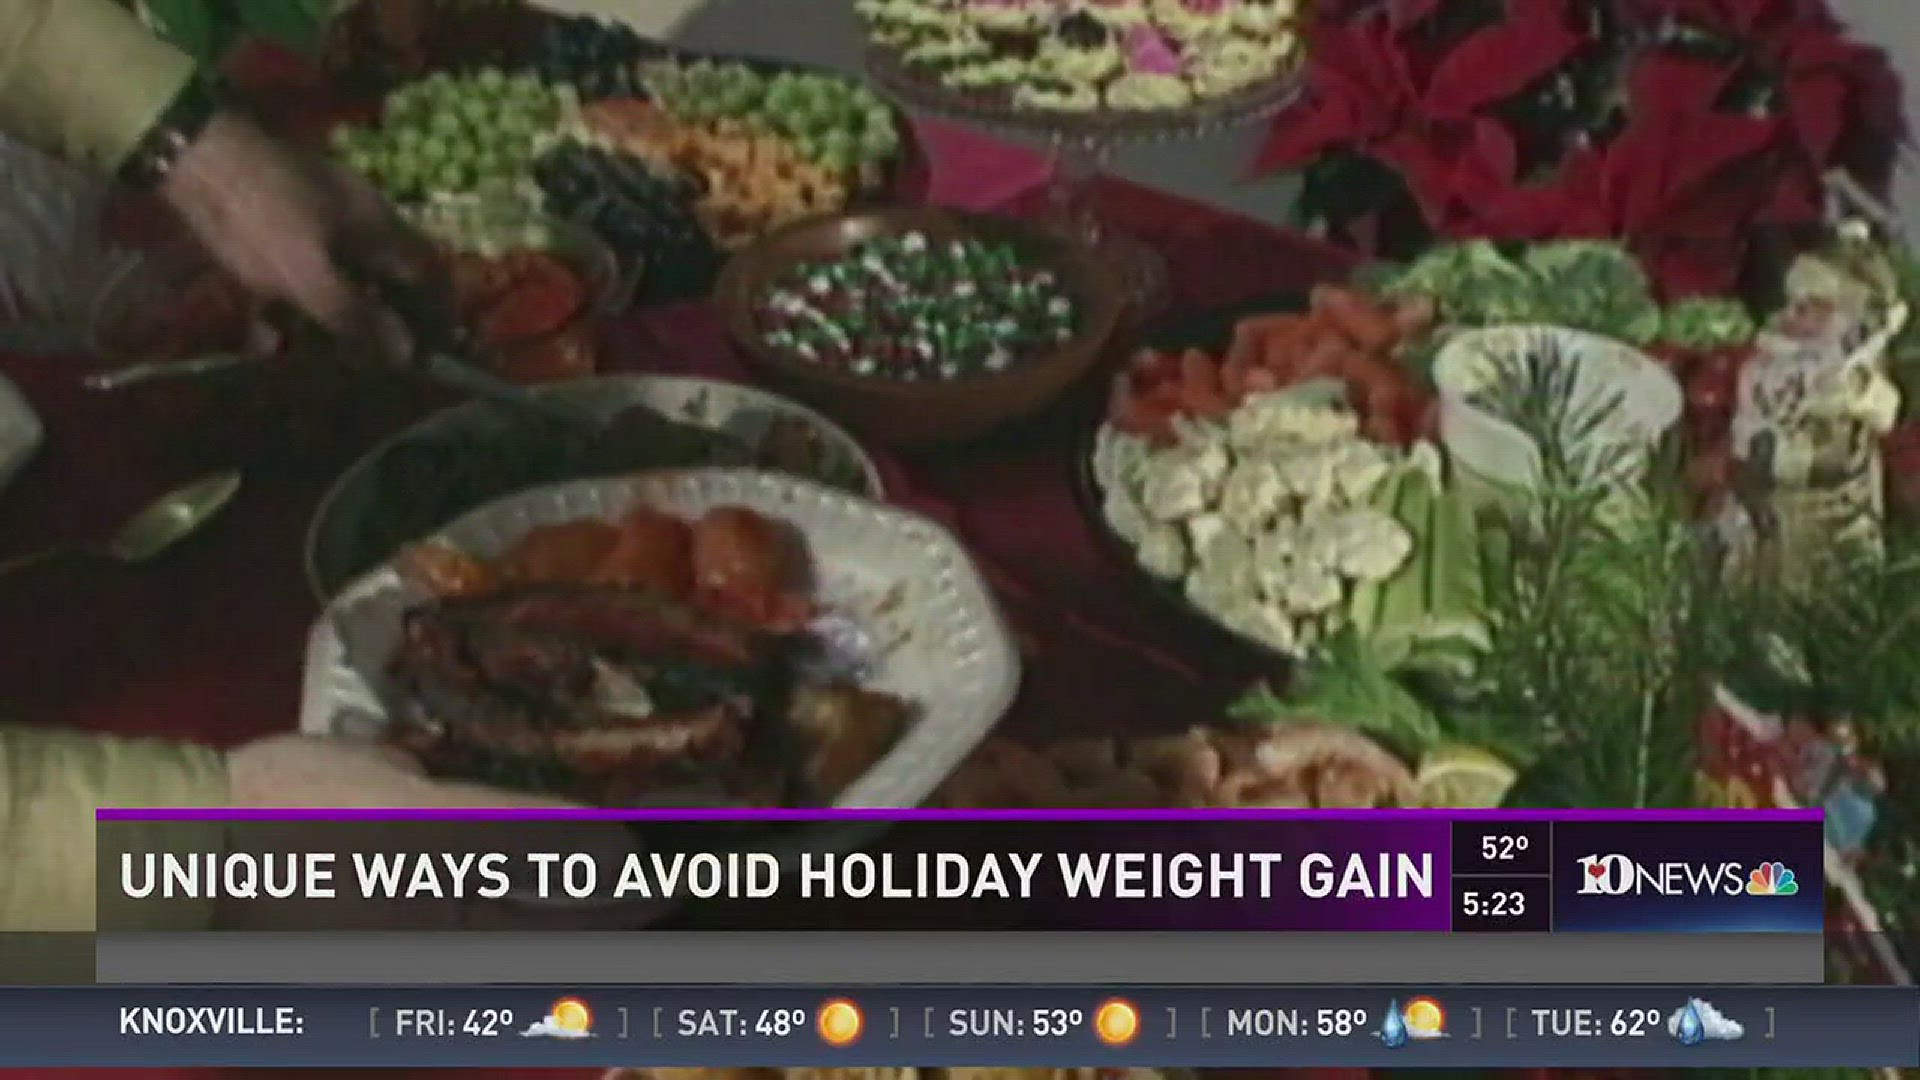 It�s tempting to overeat or eat the wrong food during the holidays. Lisa McCune, a clinical dietitian at University of Tennessee Medical Center, offers eating advice.